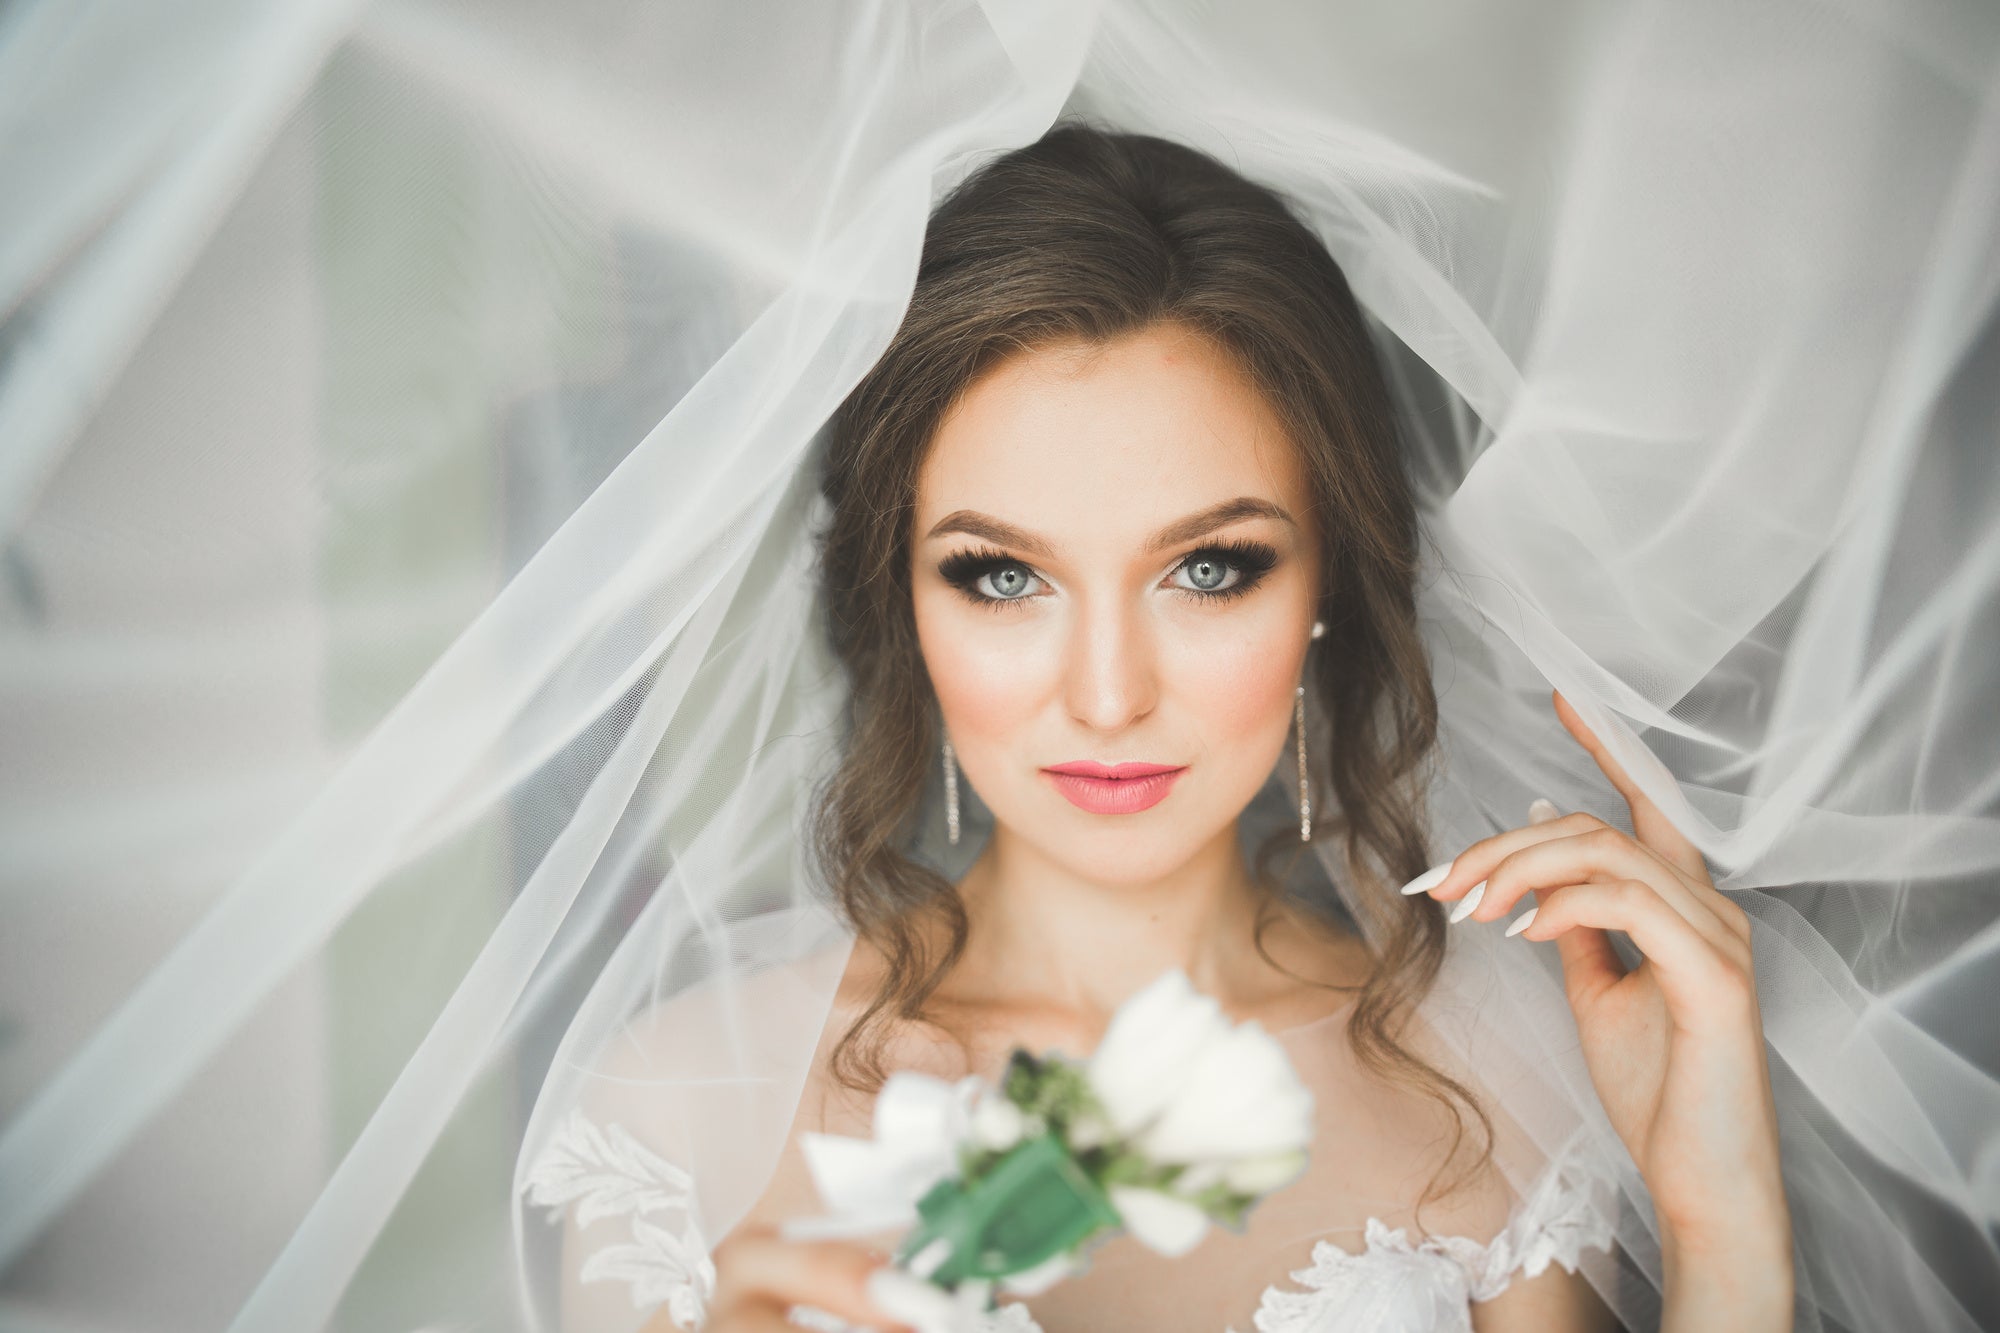 Creating A Dreamy Wedding Look: Tips for A Magical Day